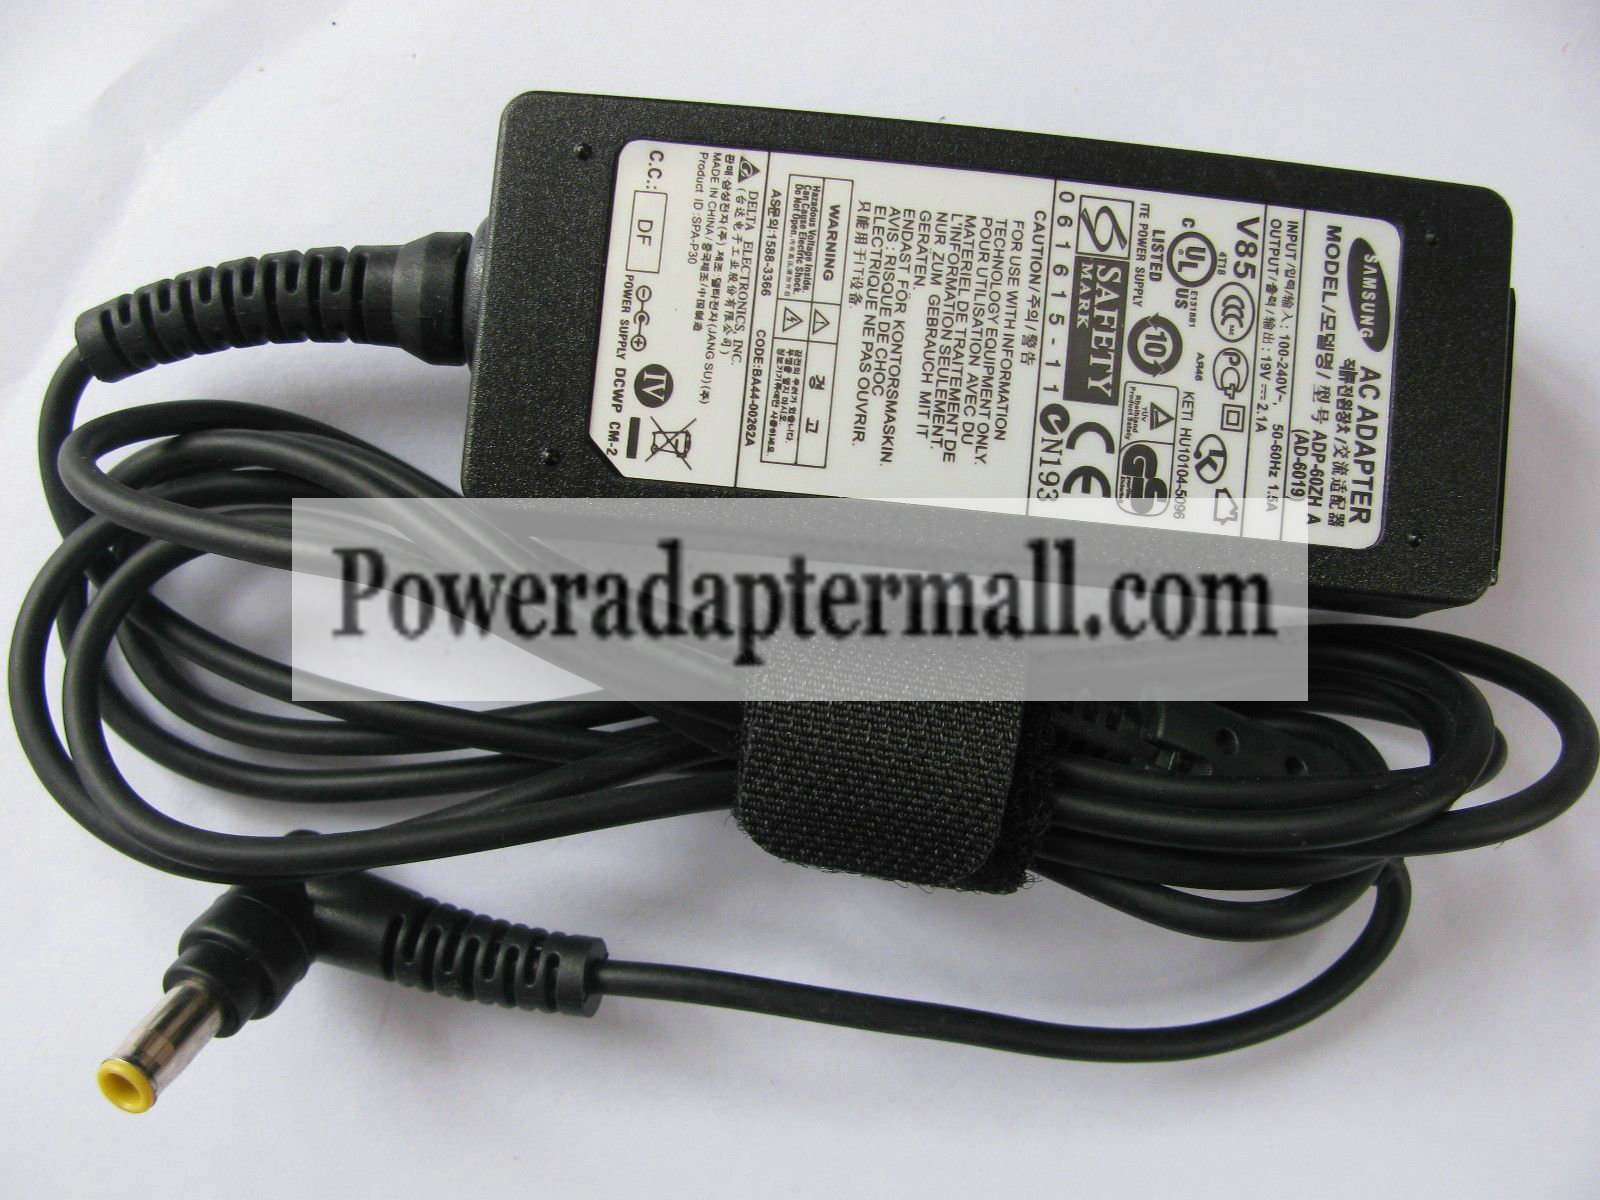 19V 2.1A Samsung AD-4019 AD-4019R AD-4019P AC Adapter charger